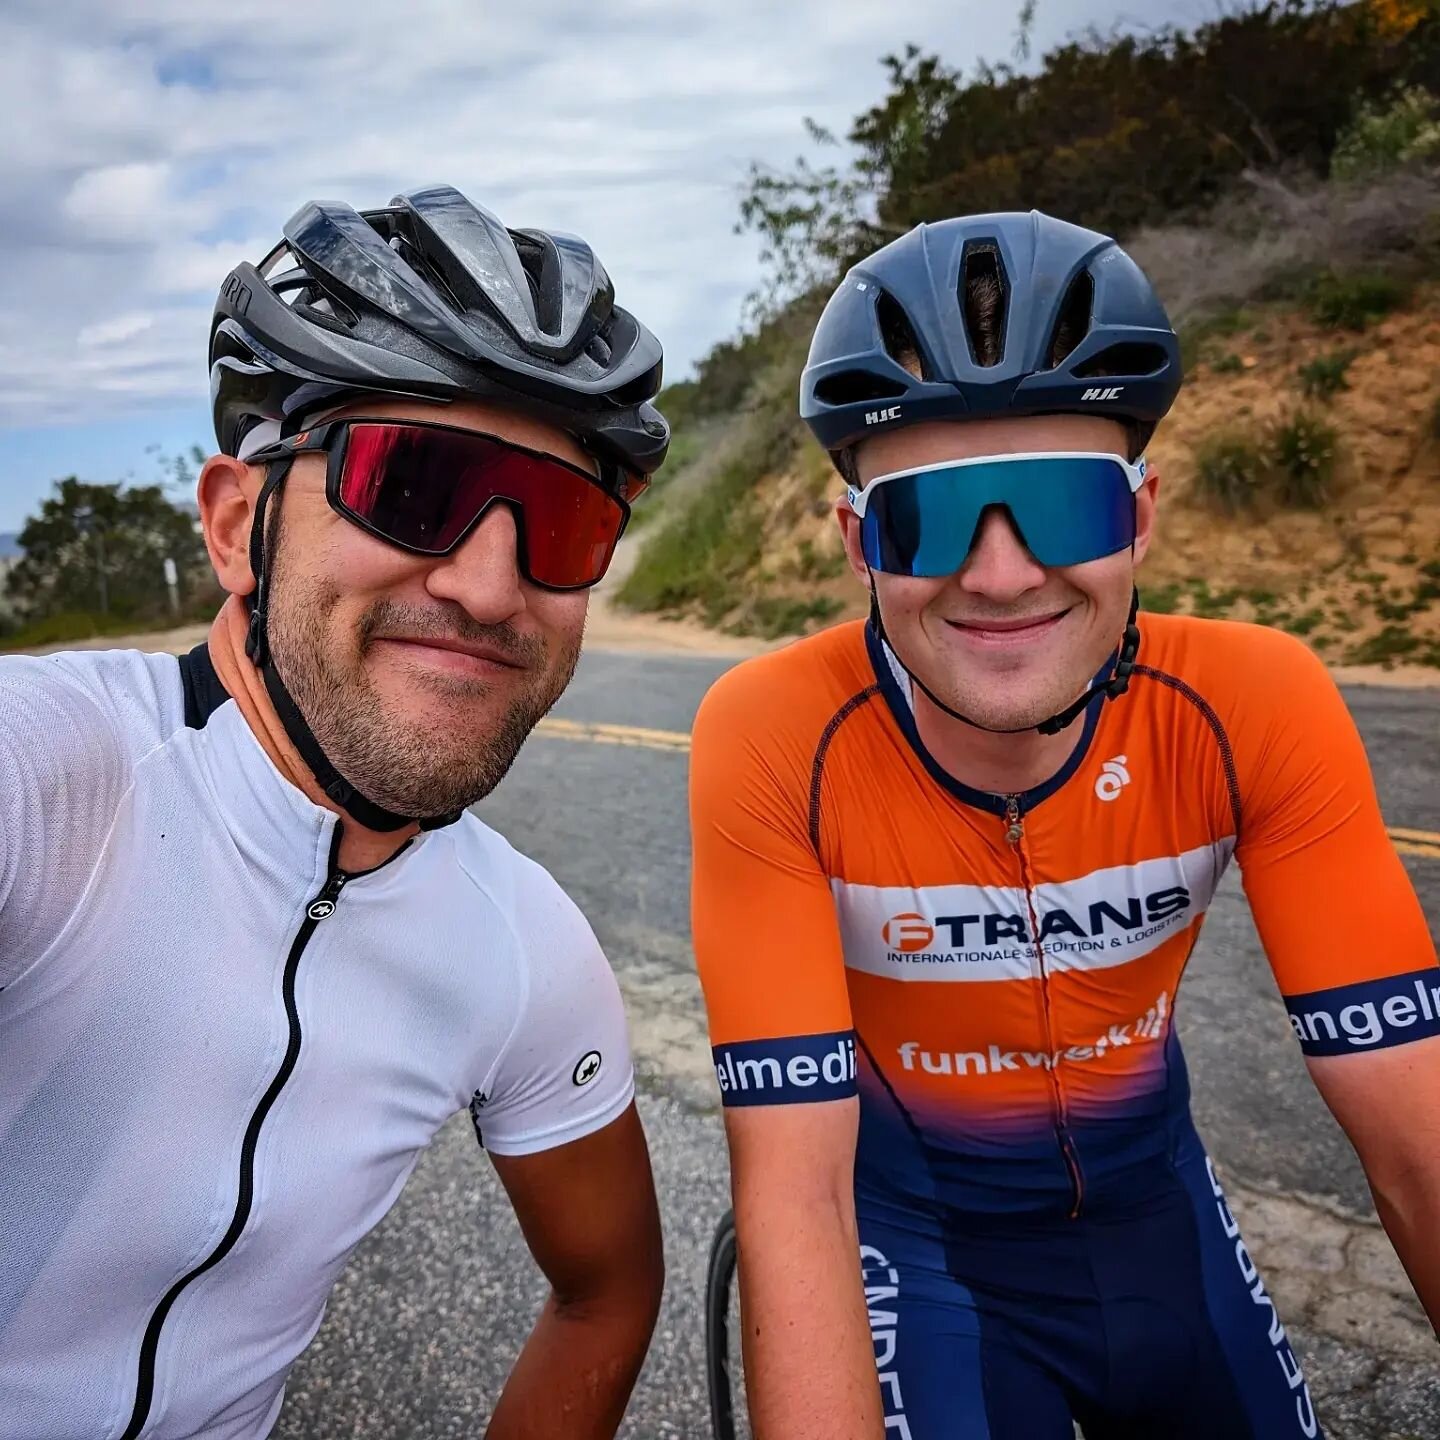 The past five and a half months went by in the blink of an eye. In that time, Magnus logged over 14000km on the bike, plus a ton of off the bike work (gym, physio work, mental training, breath training, and more). All in all it was an absolutely amaz